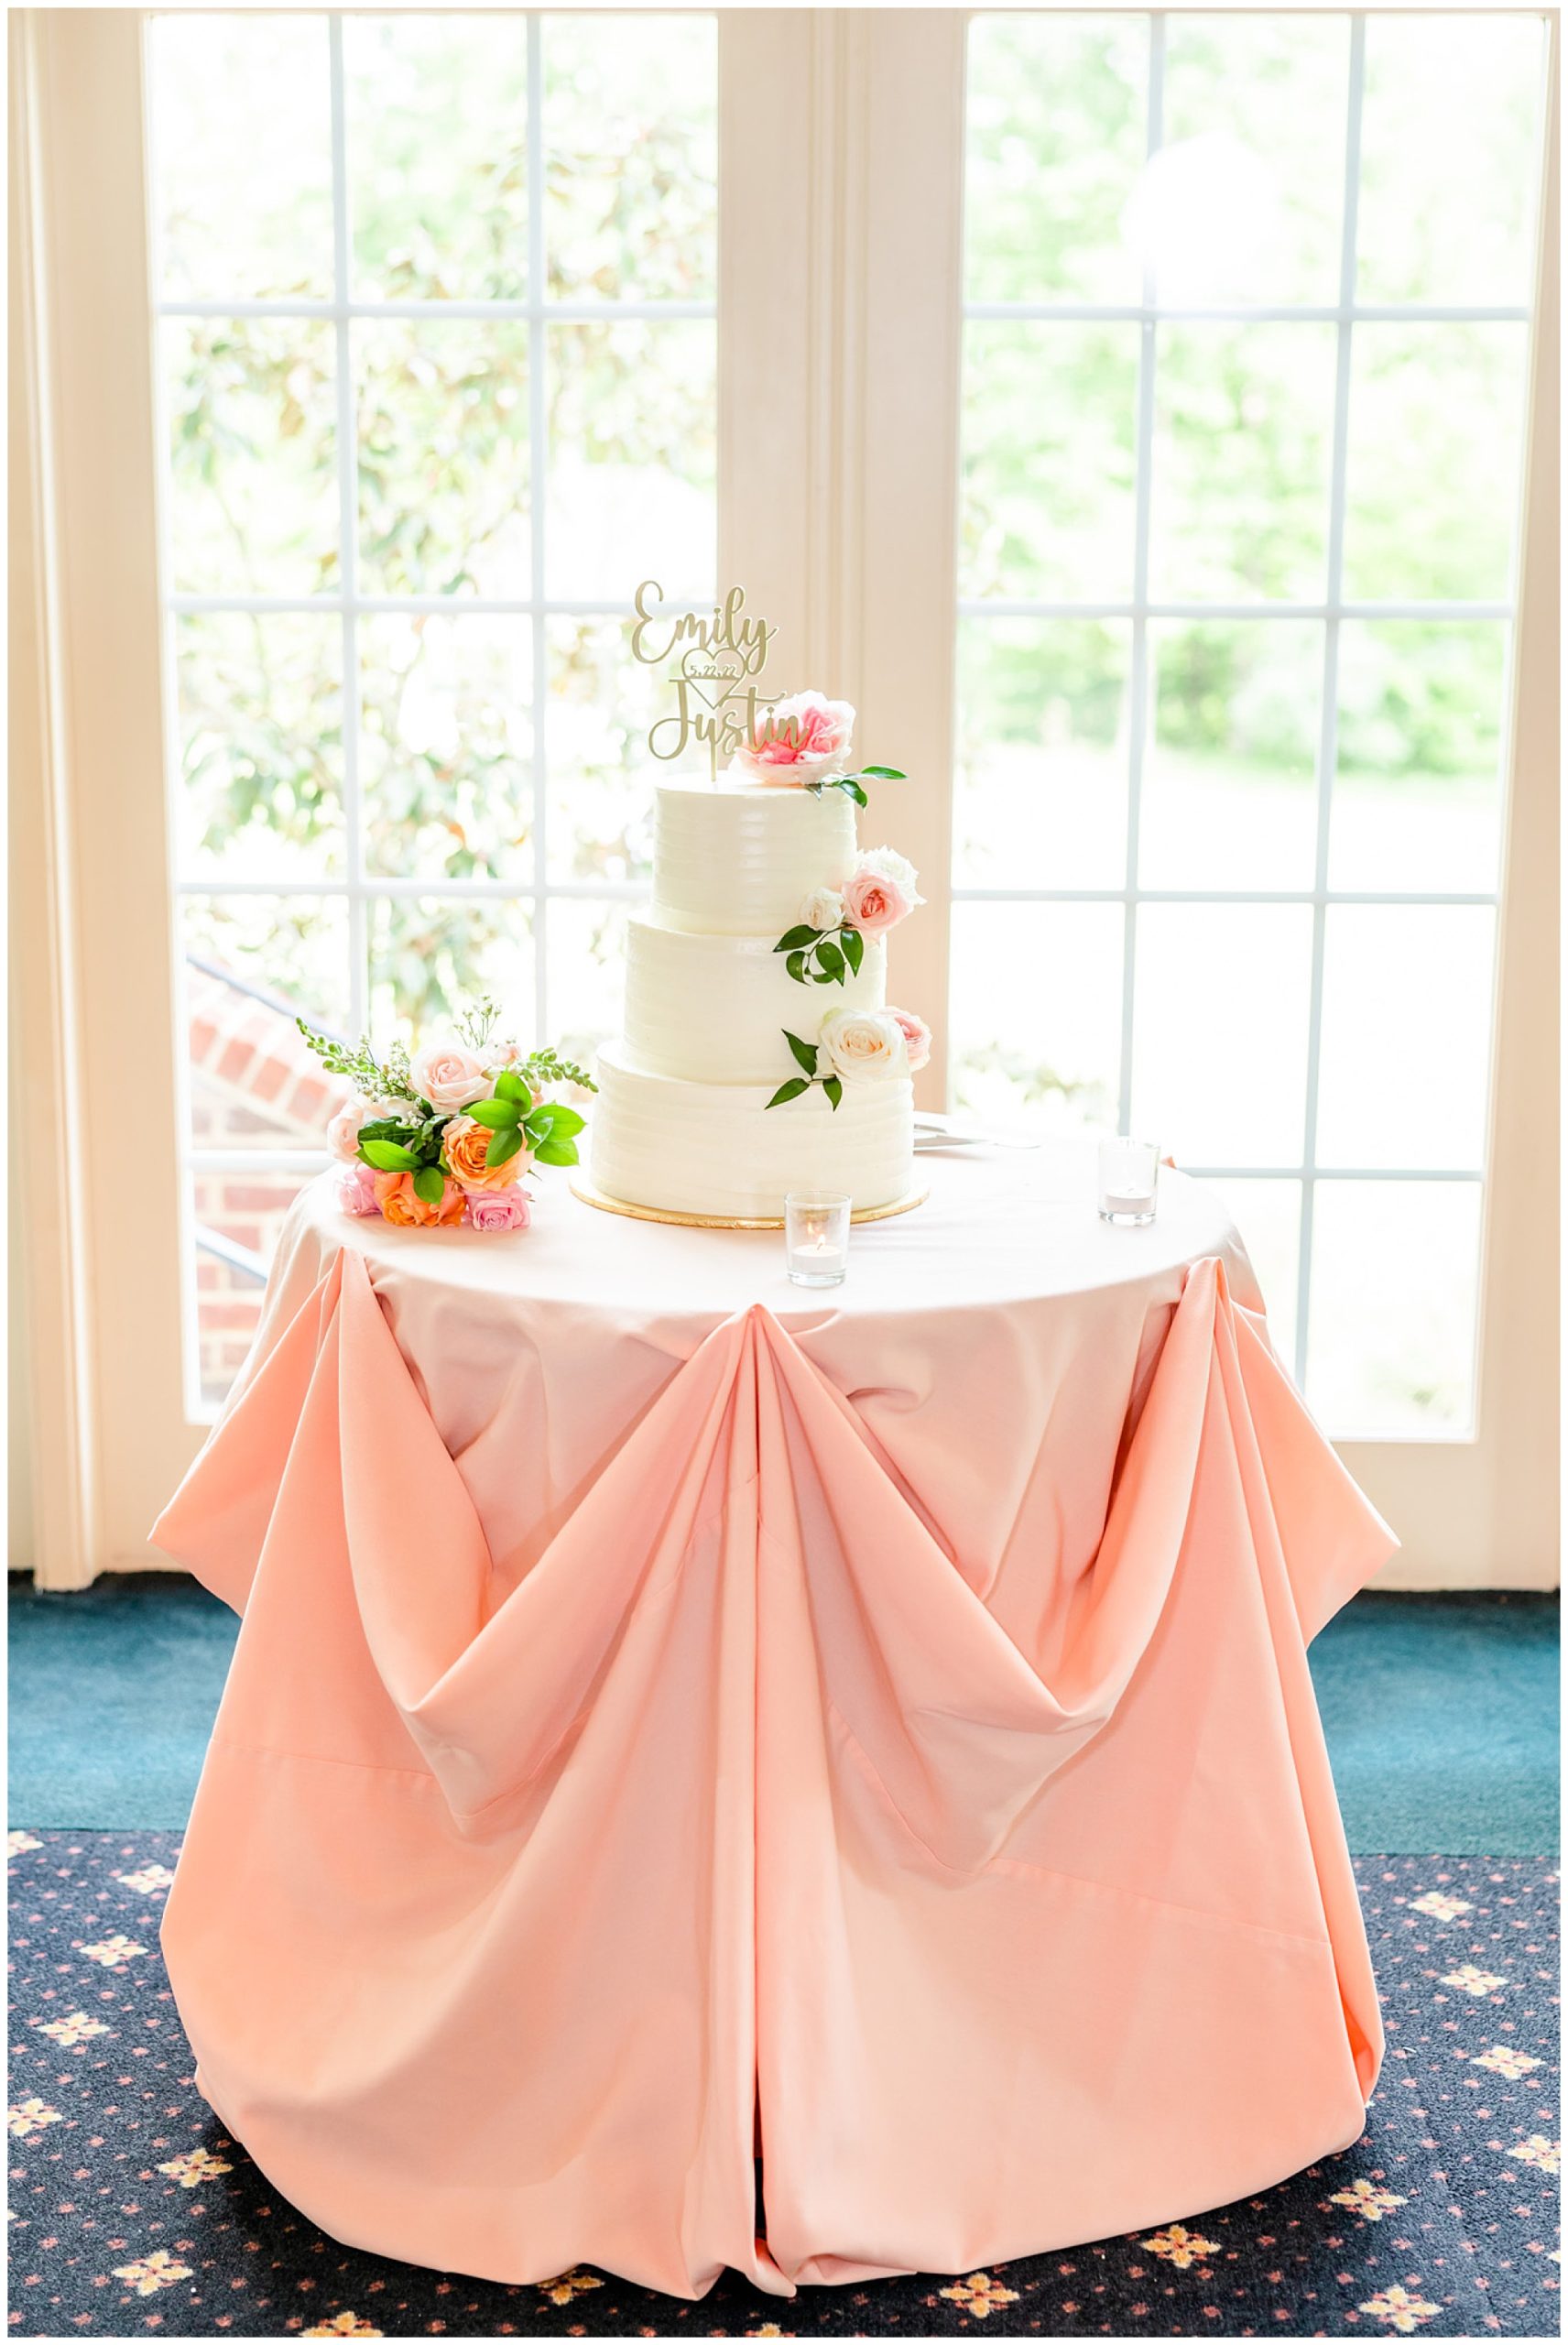 spring Westfields Golf Club wedding, Clifton Virginia wedding, northern Virginia wedding venue, DC wedding photographer, DC photographer, Virginia country club wedding, spring wedding aesthetic, Chinese American wedding, Rachel E.H.Photography, Moon and stars cake, pink tablecloth 